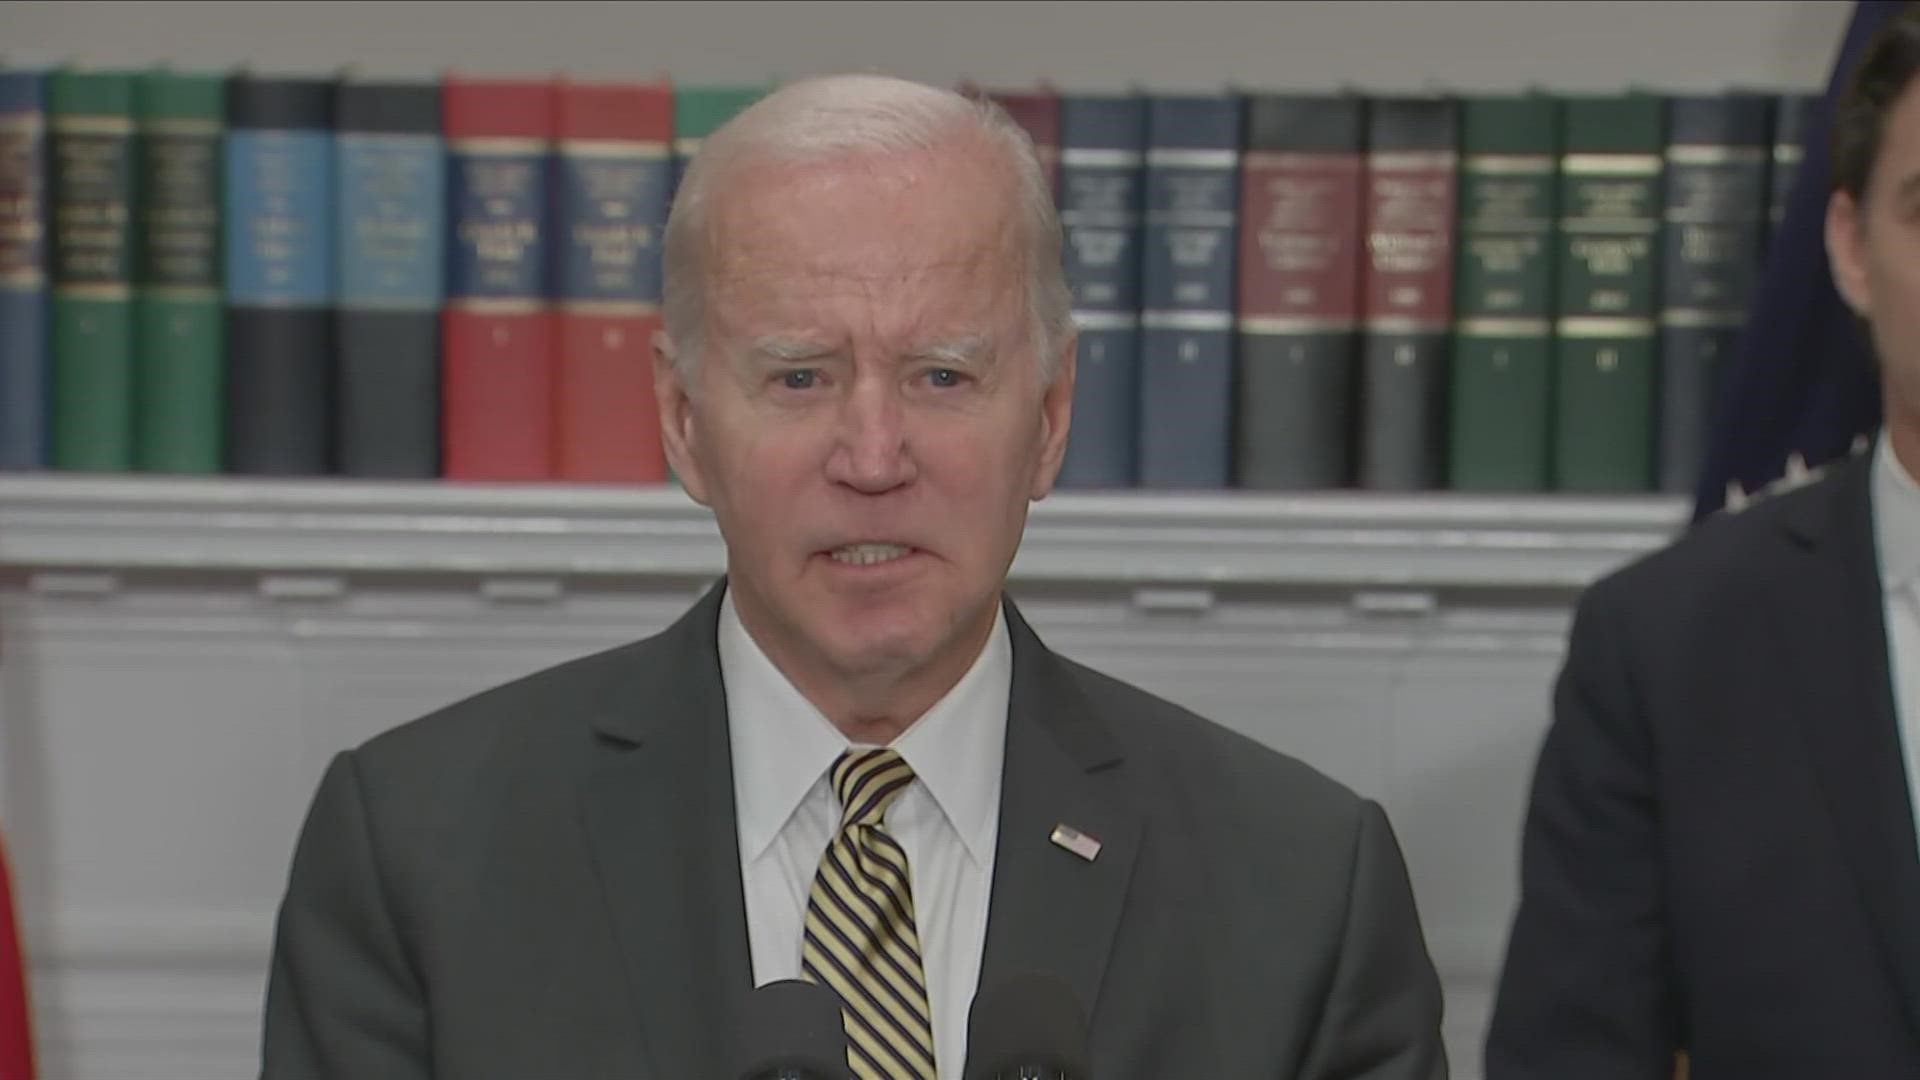 Biden's announcement comes as a response to recent production cuts announced by OPEC+ nations.